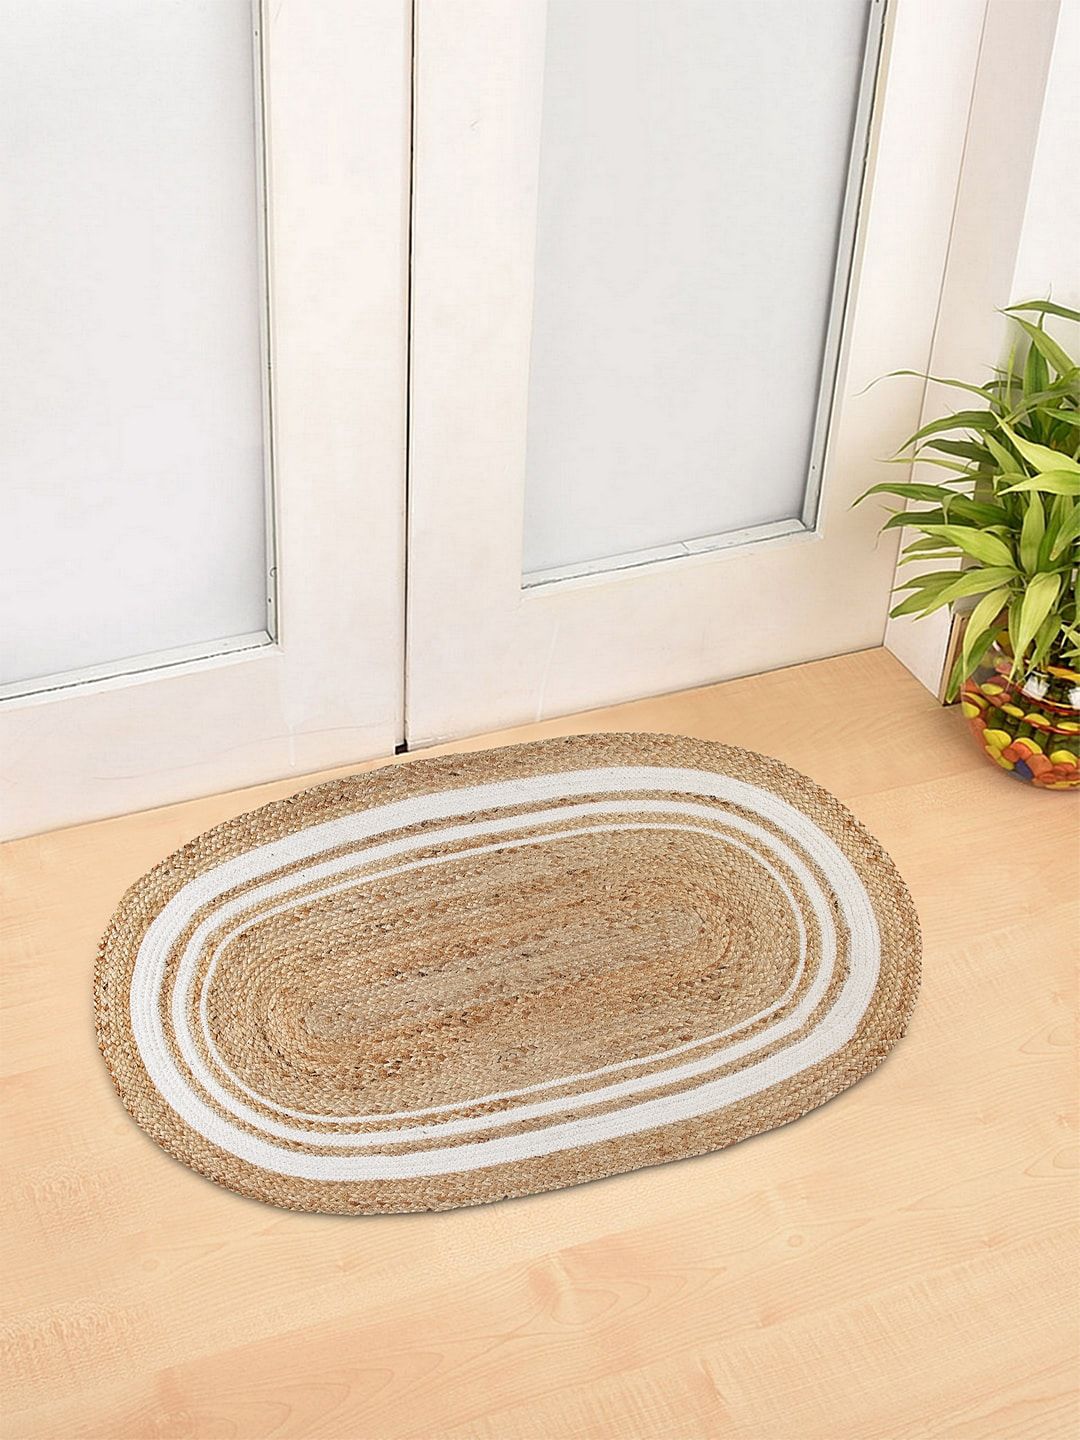 BLANC9 White & Brown Striped Cotton Hand Braided Floor Mat Price in India